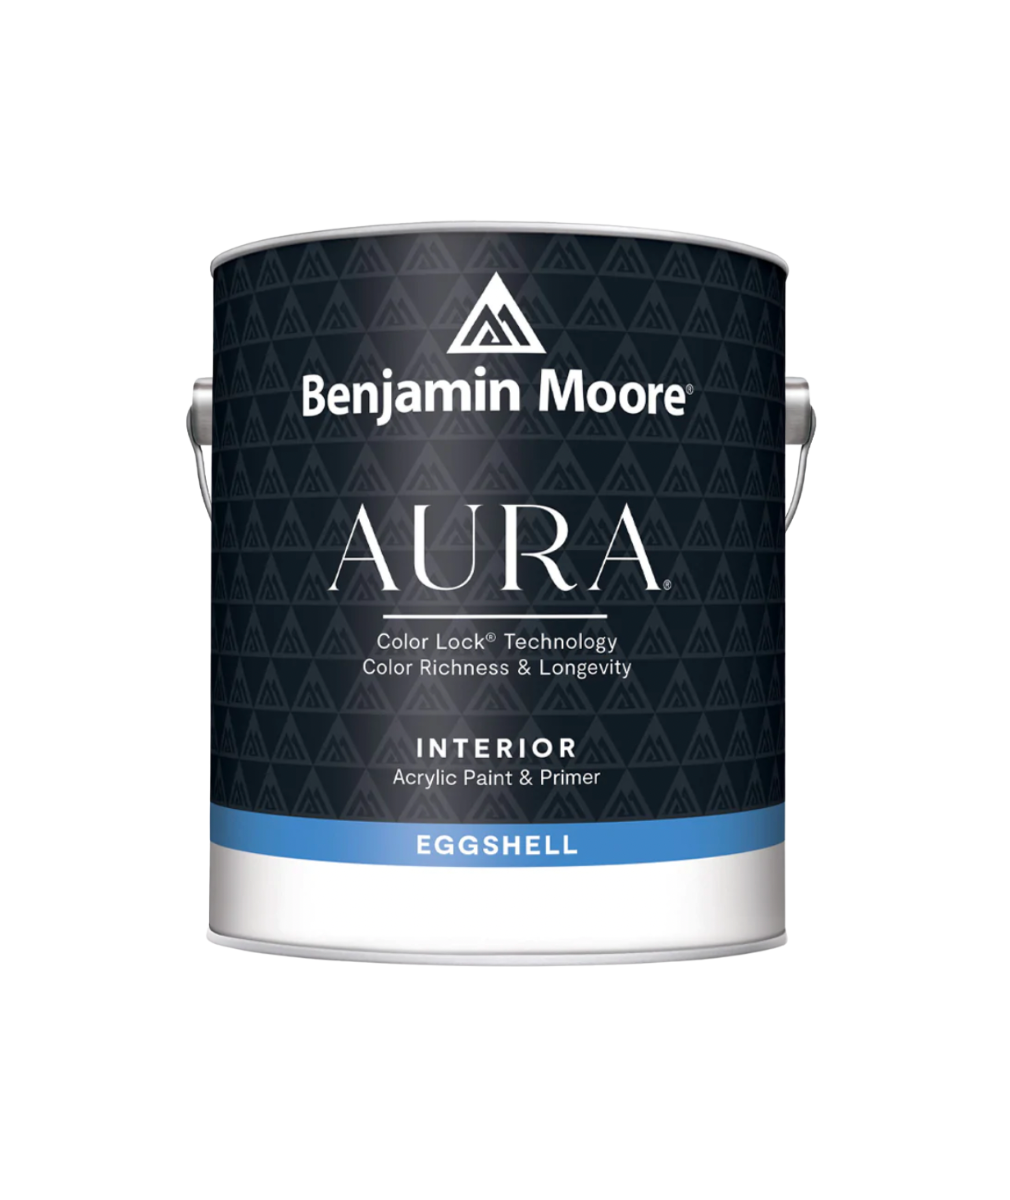 Benjamin Moore Eggshell Interior Paint available at Clement's Paint.